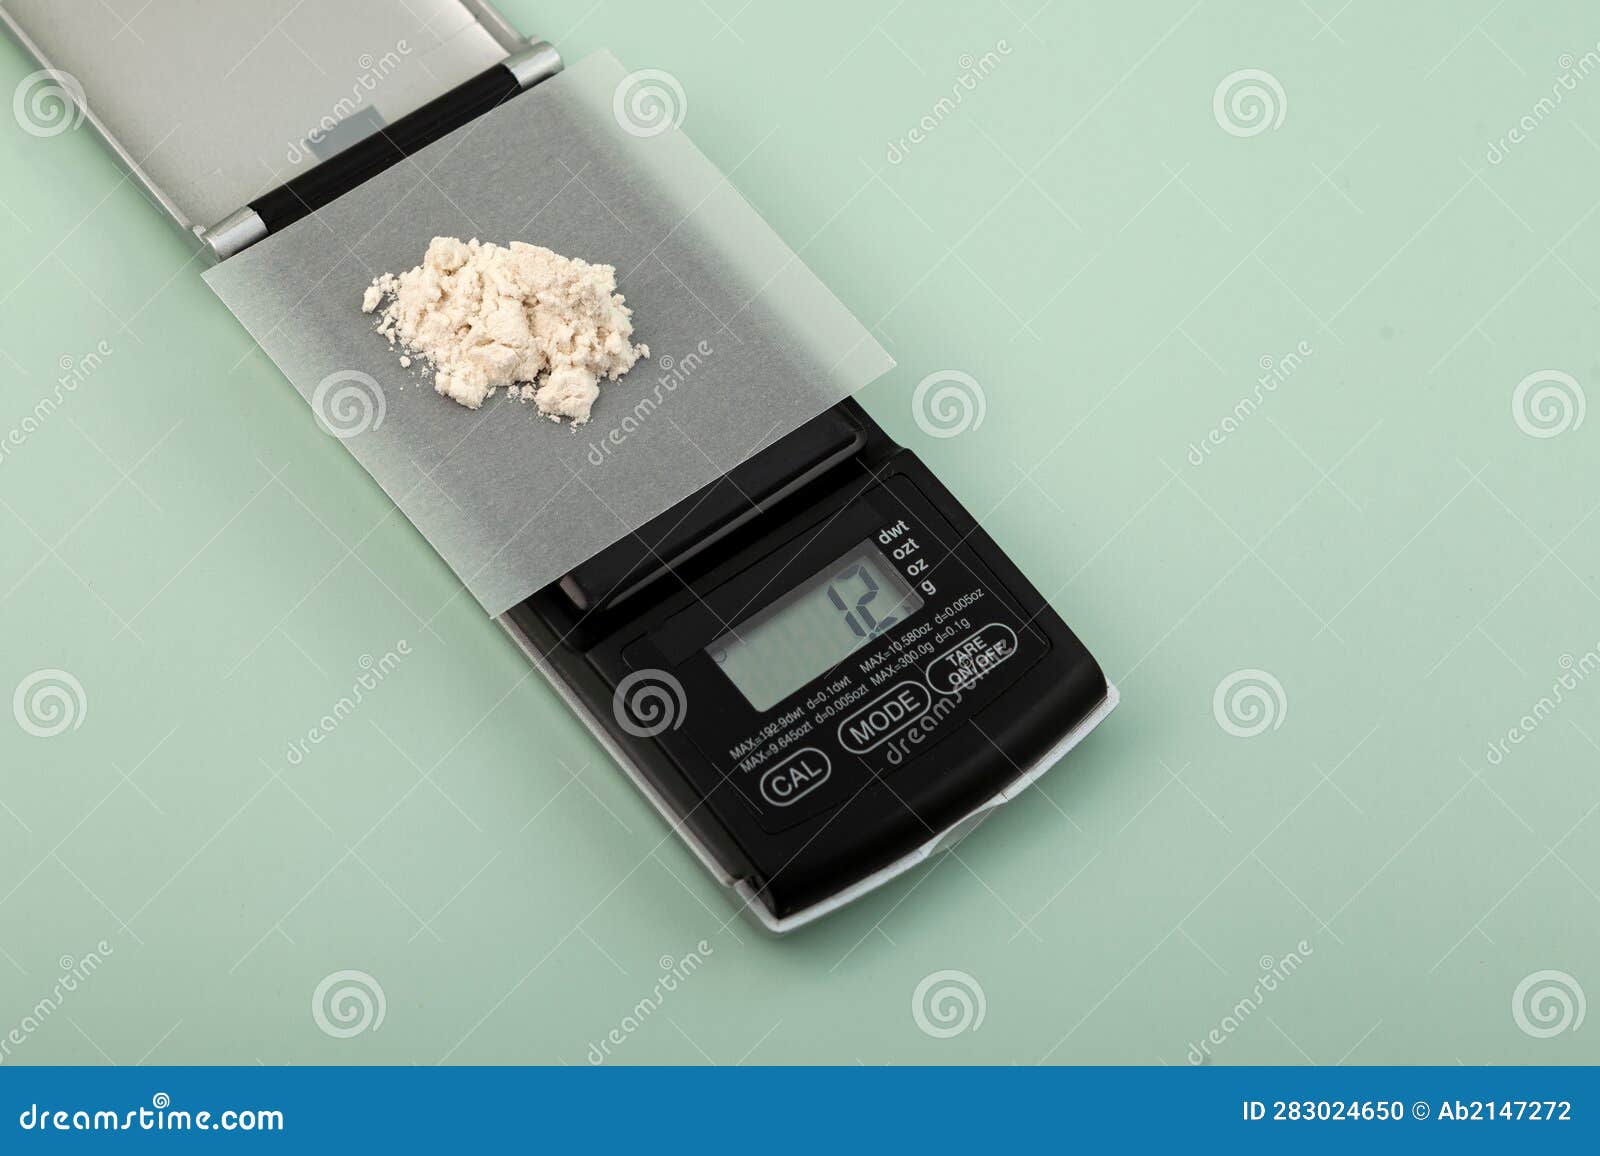 https://thumbs.dreamstime.com/z/pile-guar-gum-powder-accurate-electronic-digital-scale-food-additive-e-exact-dosage-grams-guaran-283024650.jpg